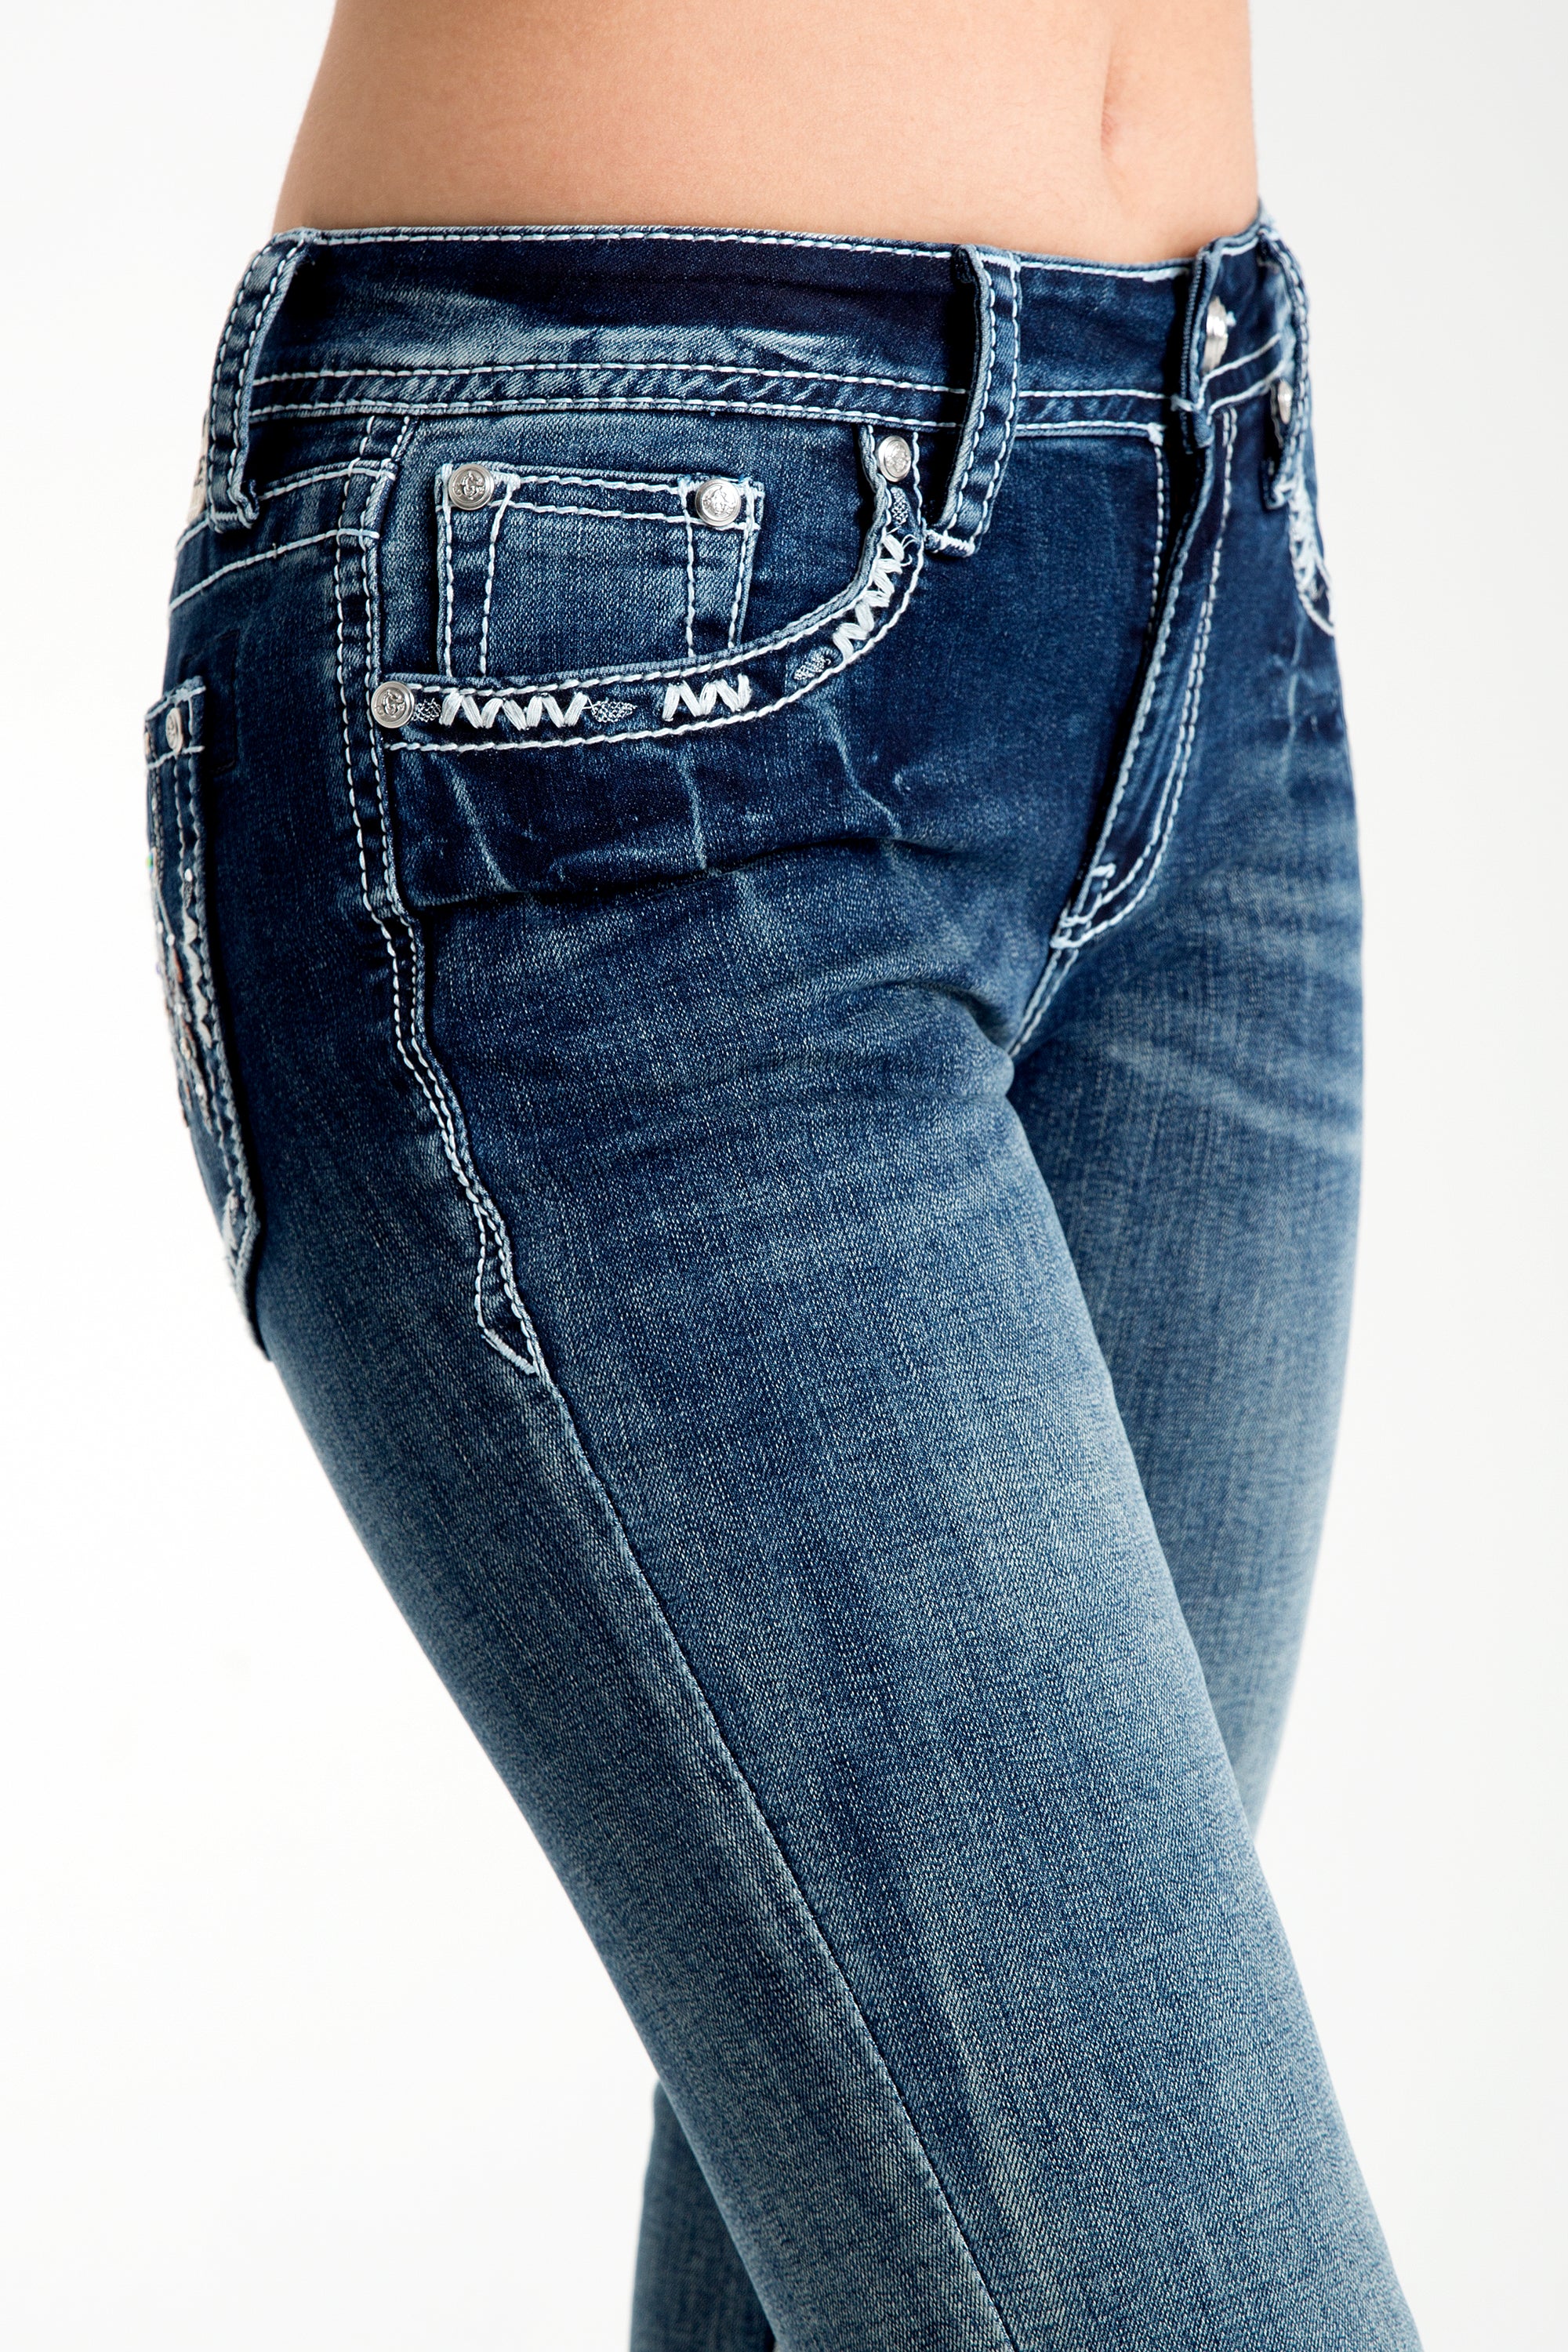 embellished-womens-jeans